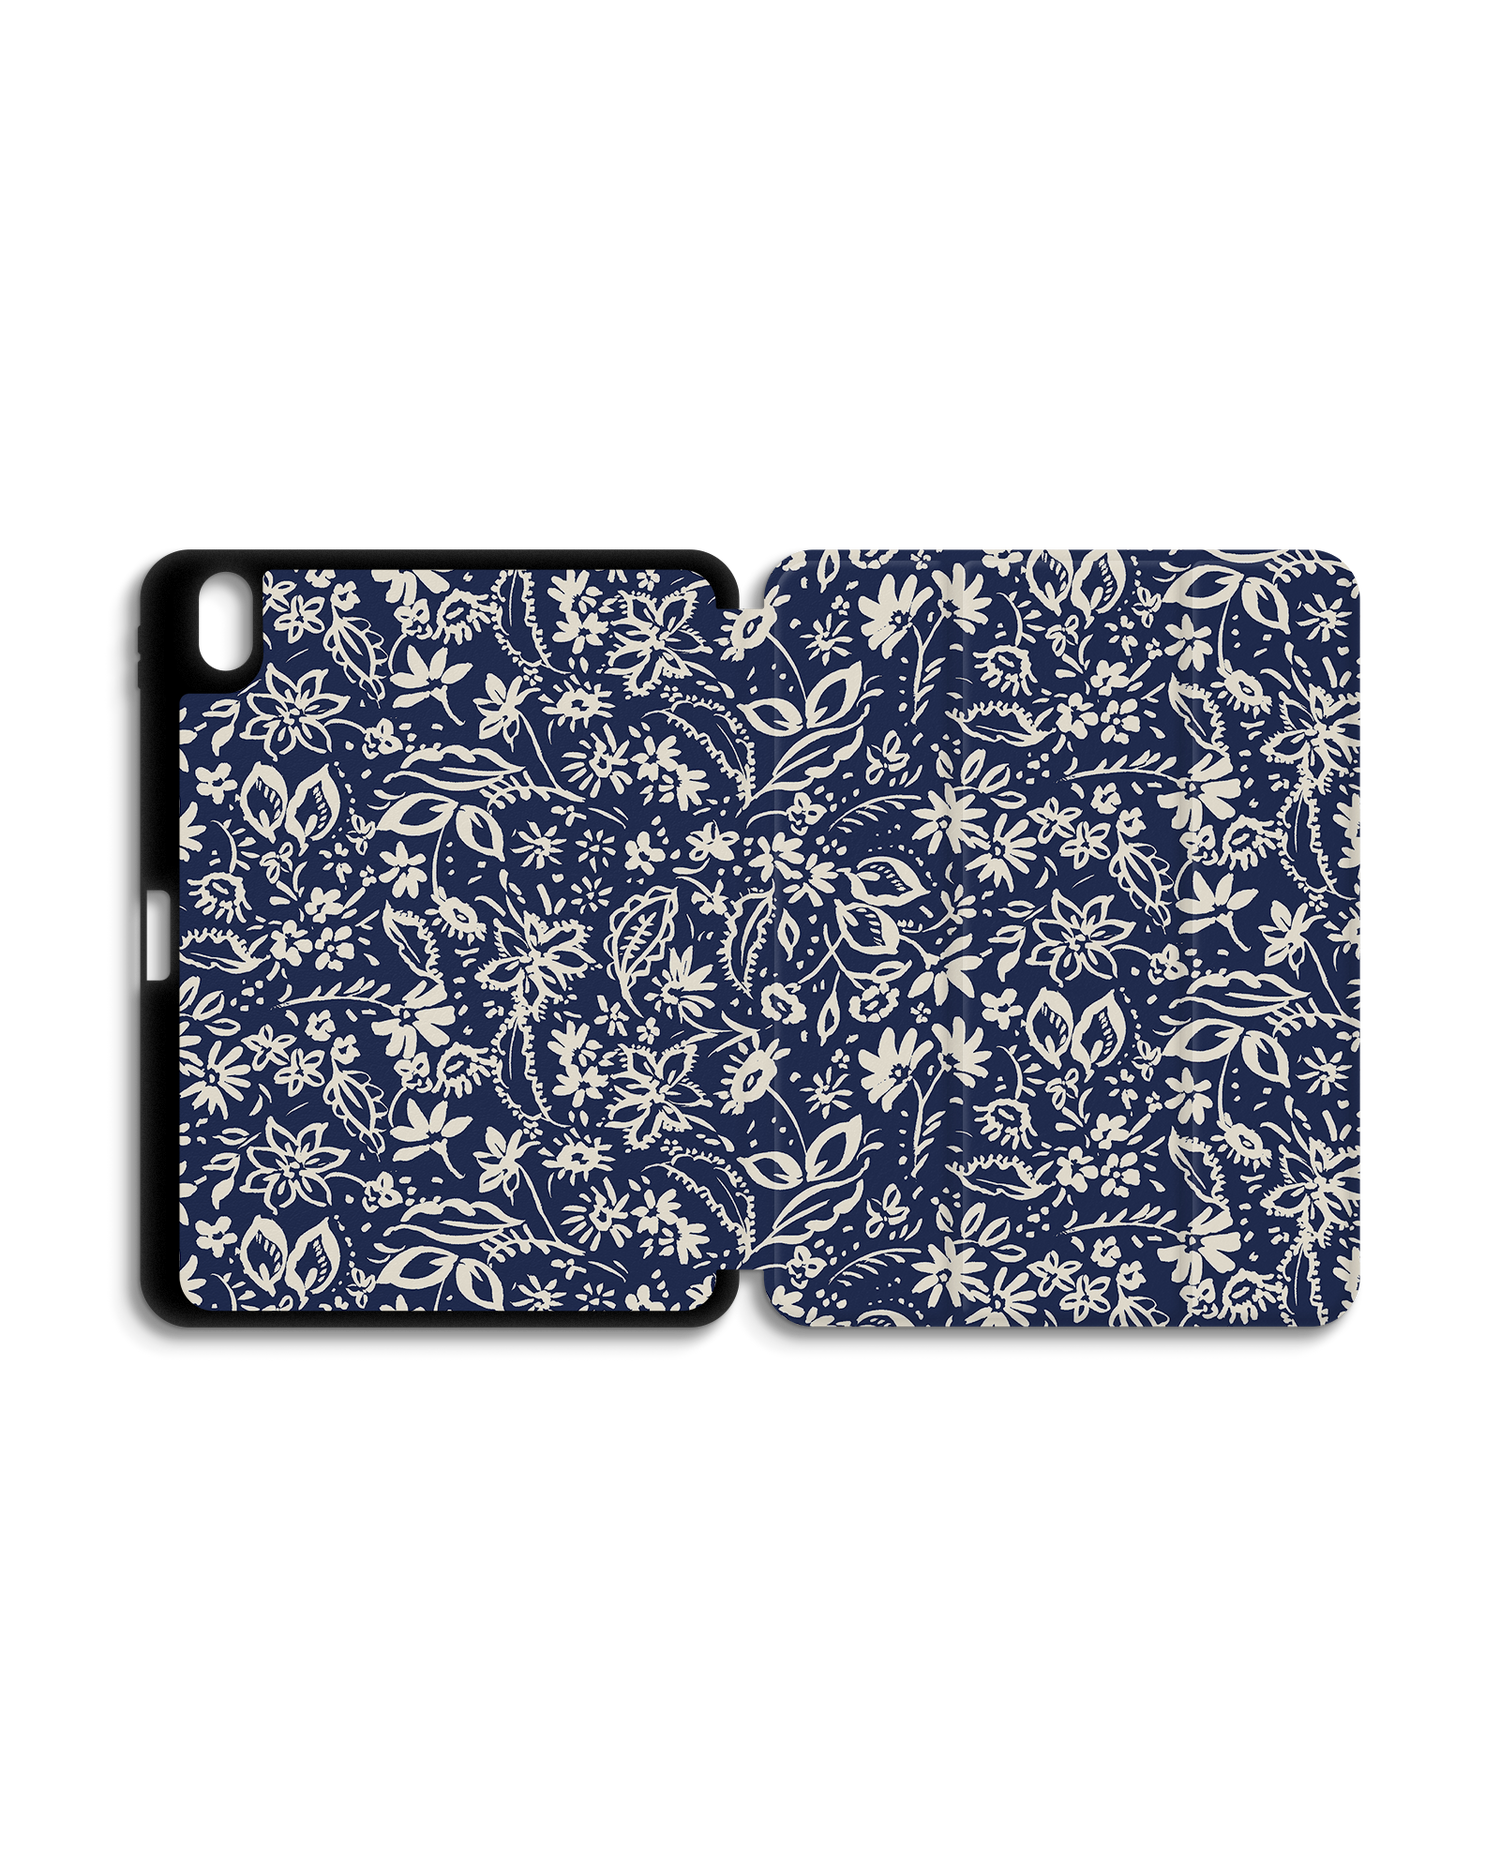 Ditsy Blue Paisley iPad Case with Pencil Holder for Apple iPad (10th Generation): Opened exterior view